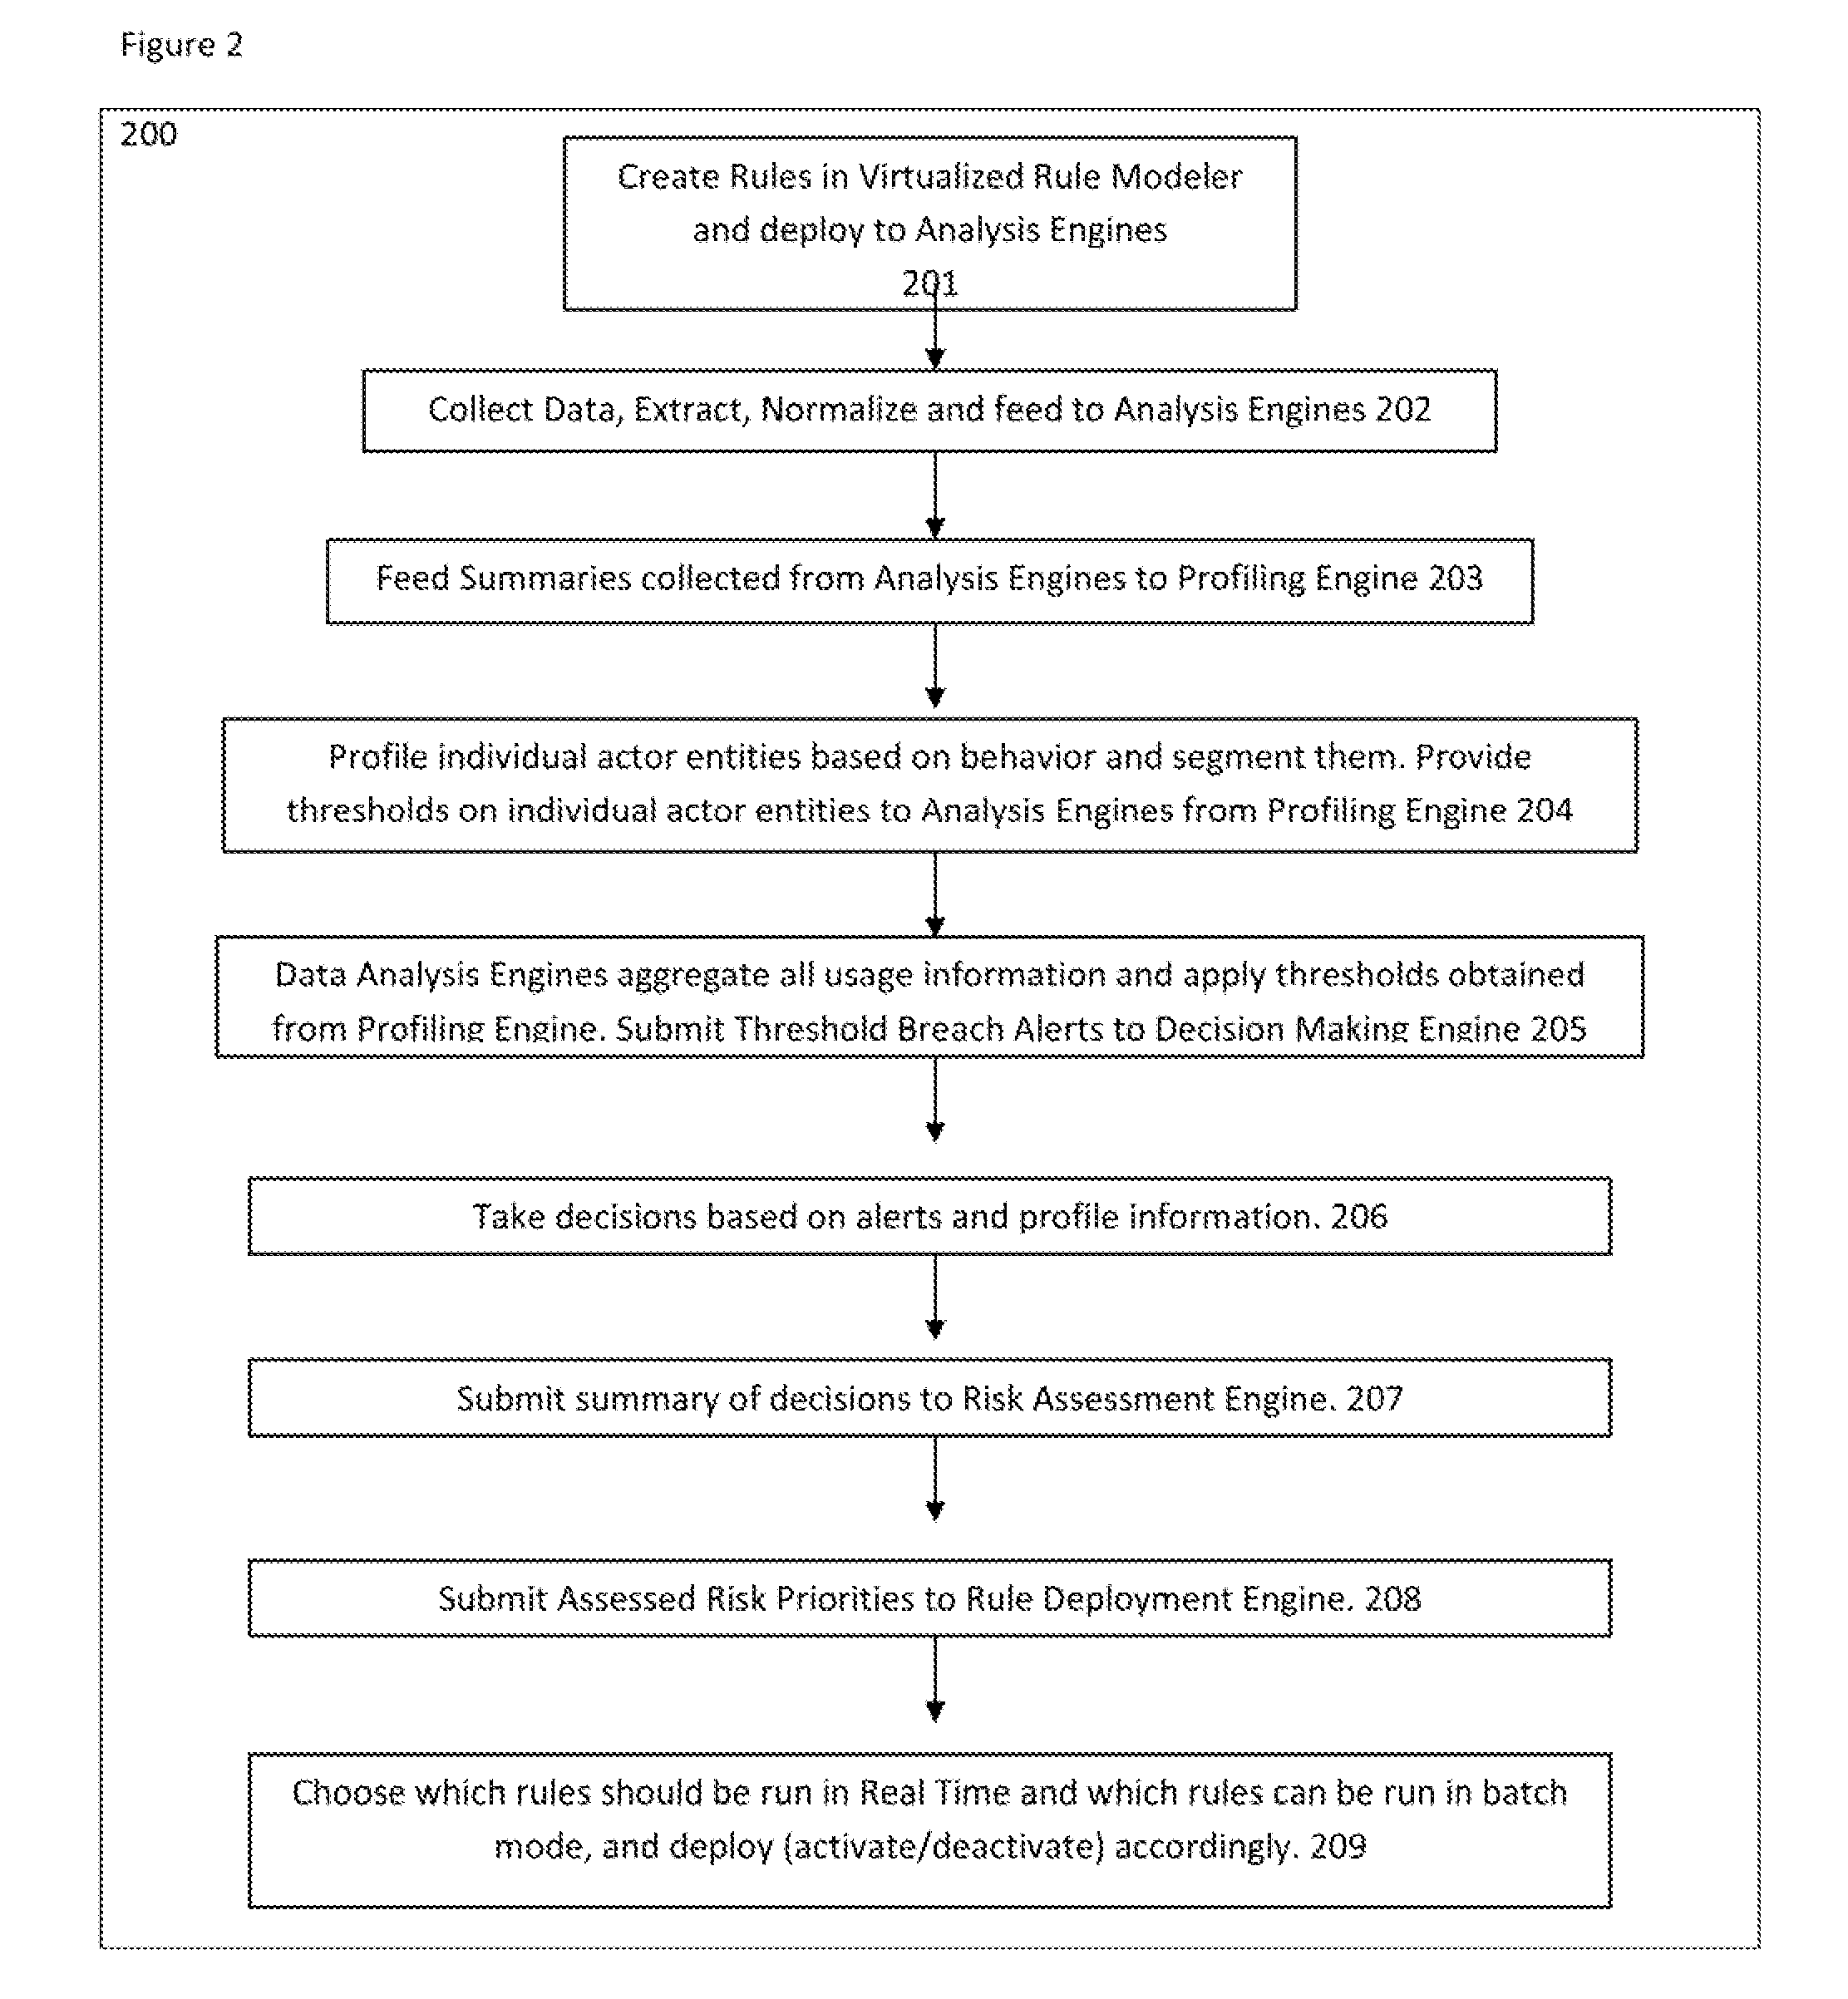 System And Method For An Auto-Configurable Architecture For Managing Business Operations Favoring Optimizing Hardware Resources